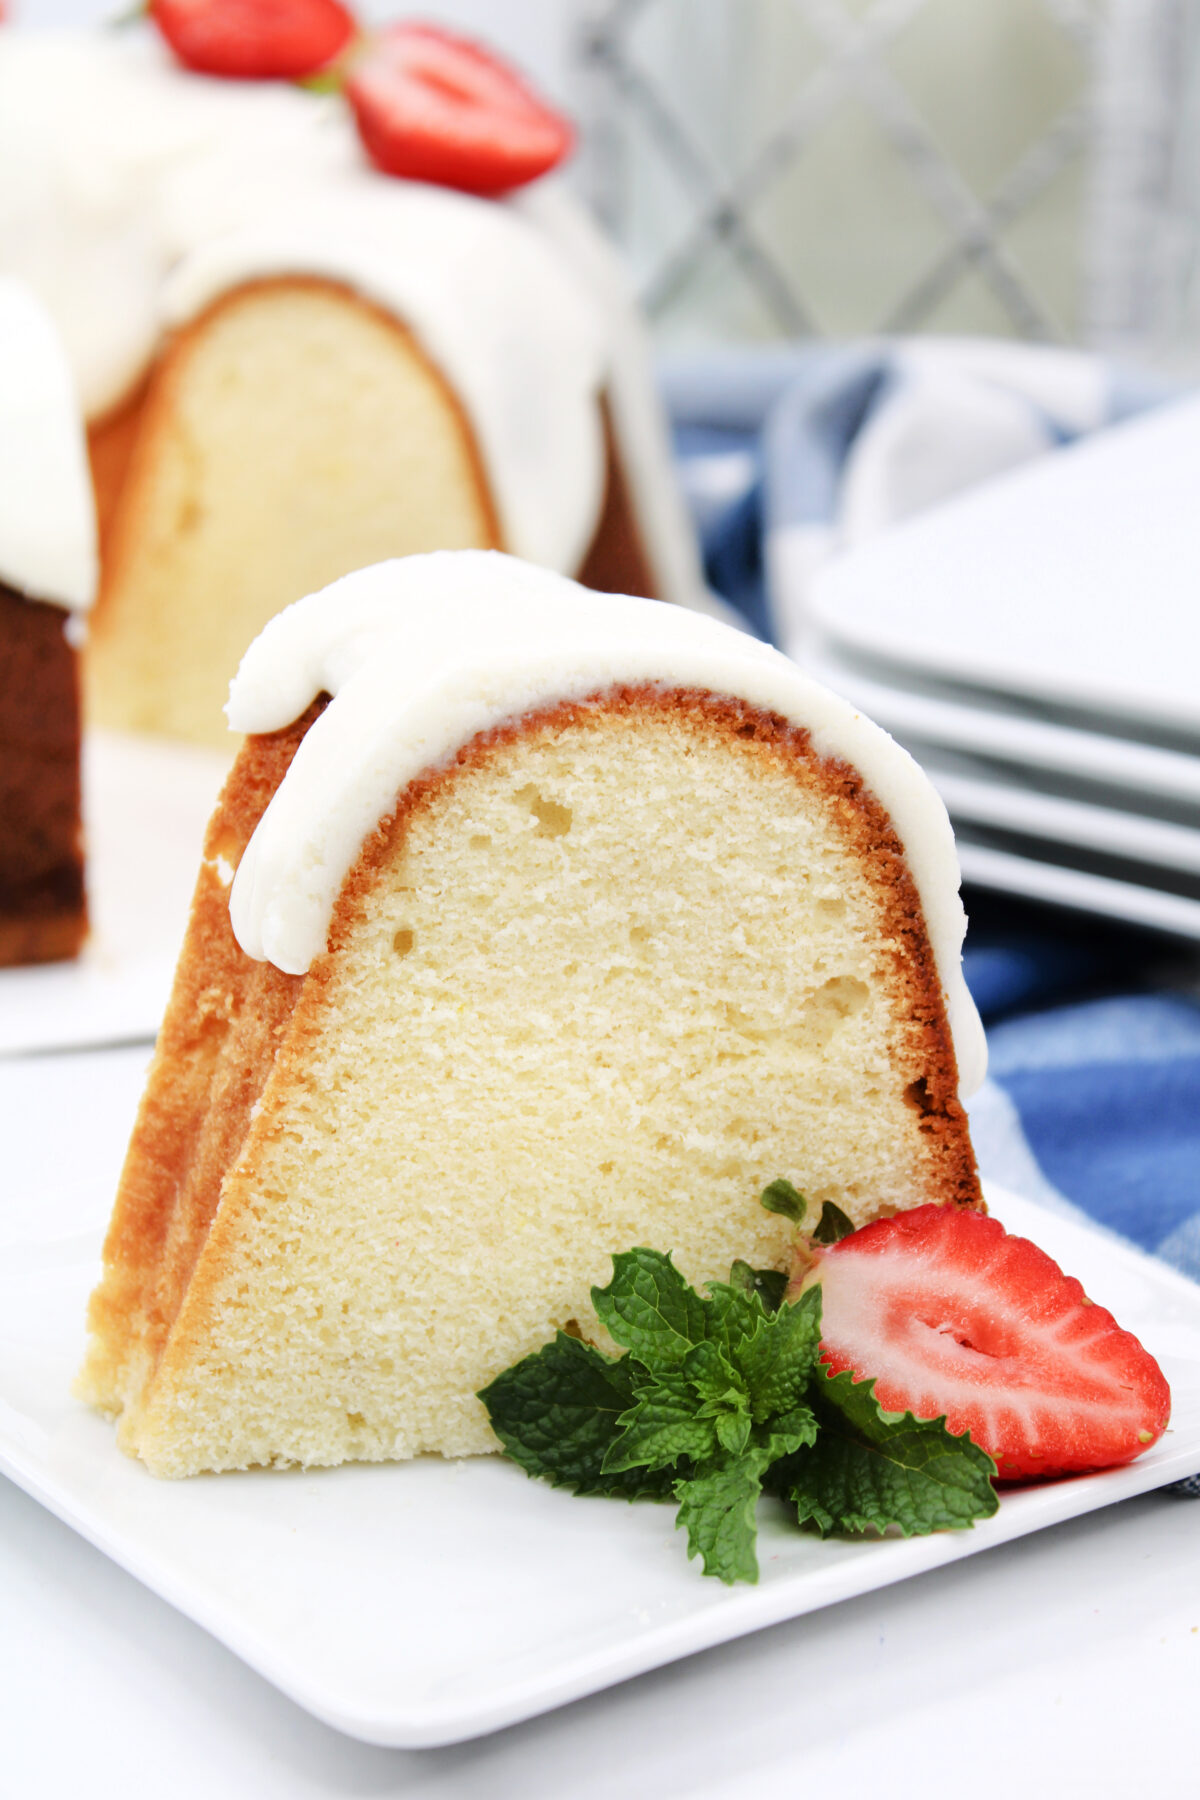 The best crack cake bundt cake ever! (not too sweet) - Lifestyle of a Foodie